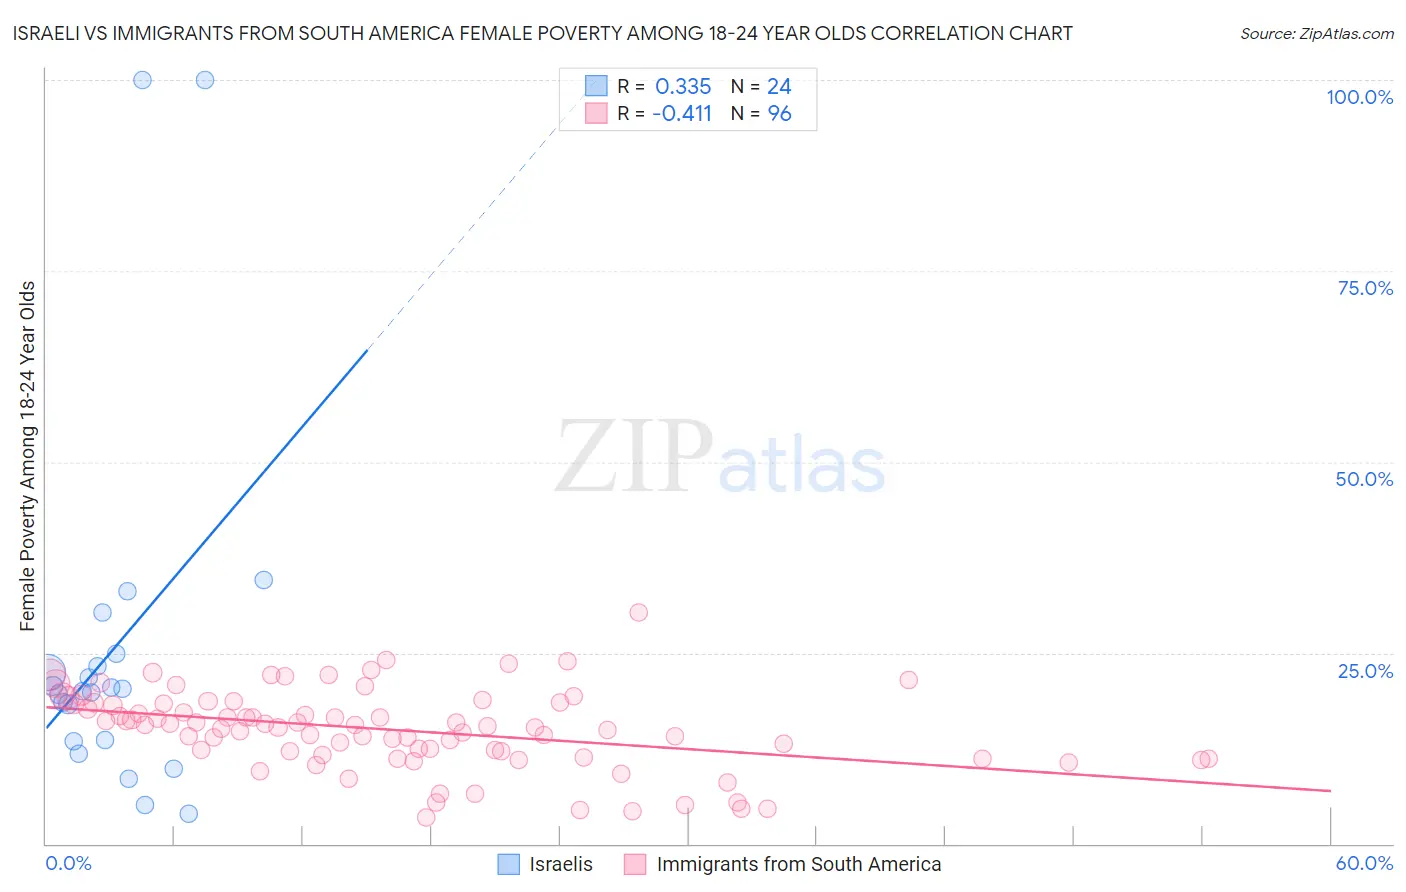 Israeli vs Immigrants from South America Female Poverty Among 18-24 Year Olds